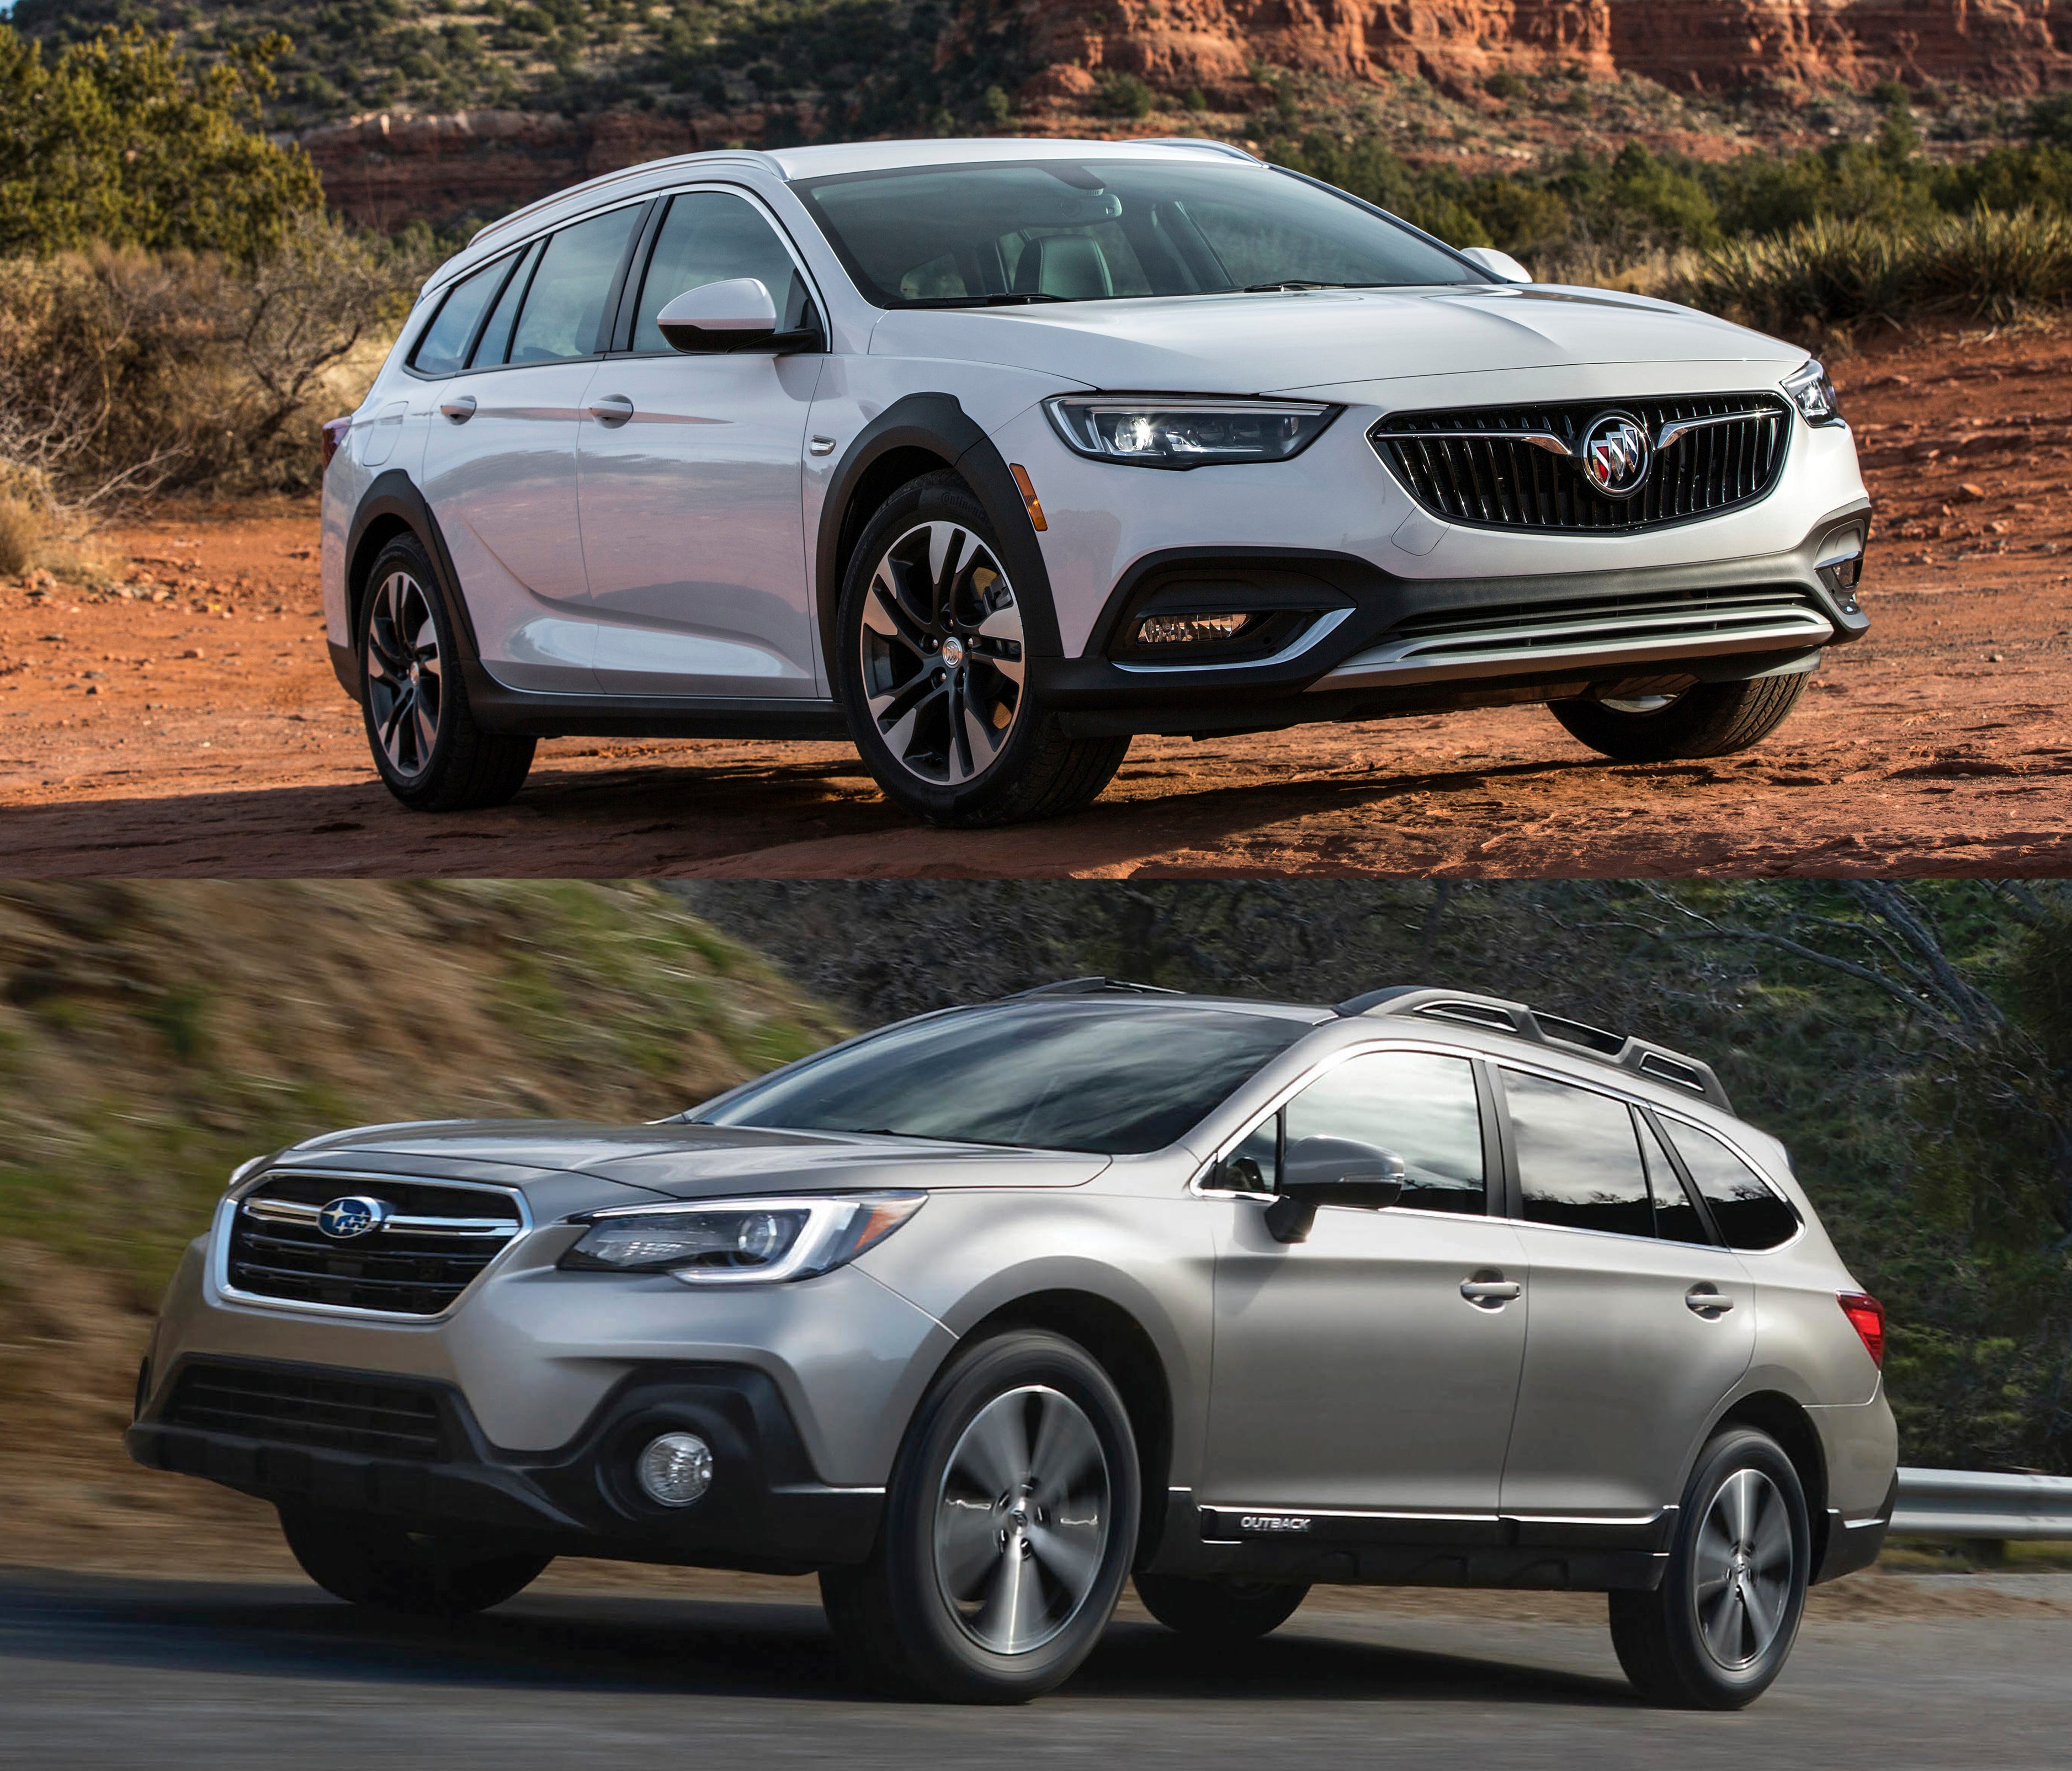 The 2018 Buick Regal TourX, top, a station wagon-based SUV alternative that combines tons of cargo space with a sleek look and a near-luxury feel. The 2018 Subaru Outback, bottom, one of the original SUV alternatives.